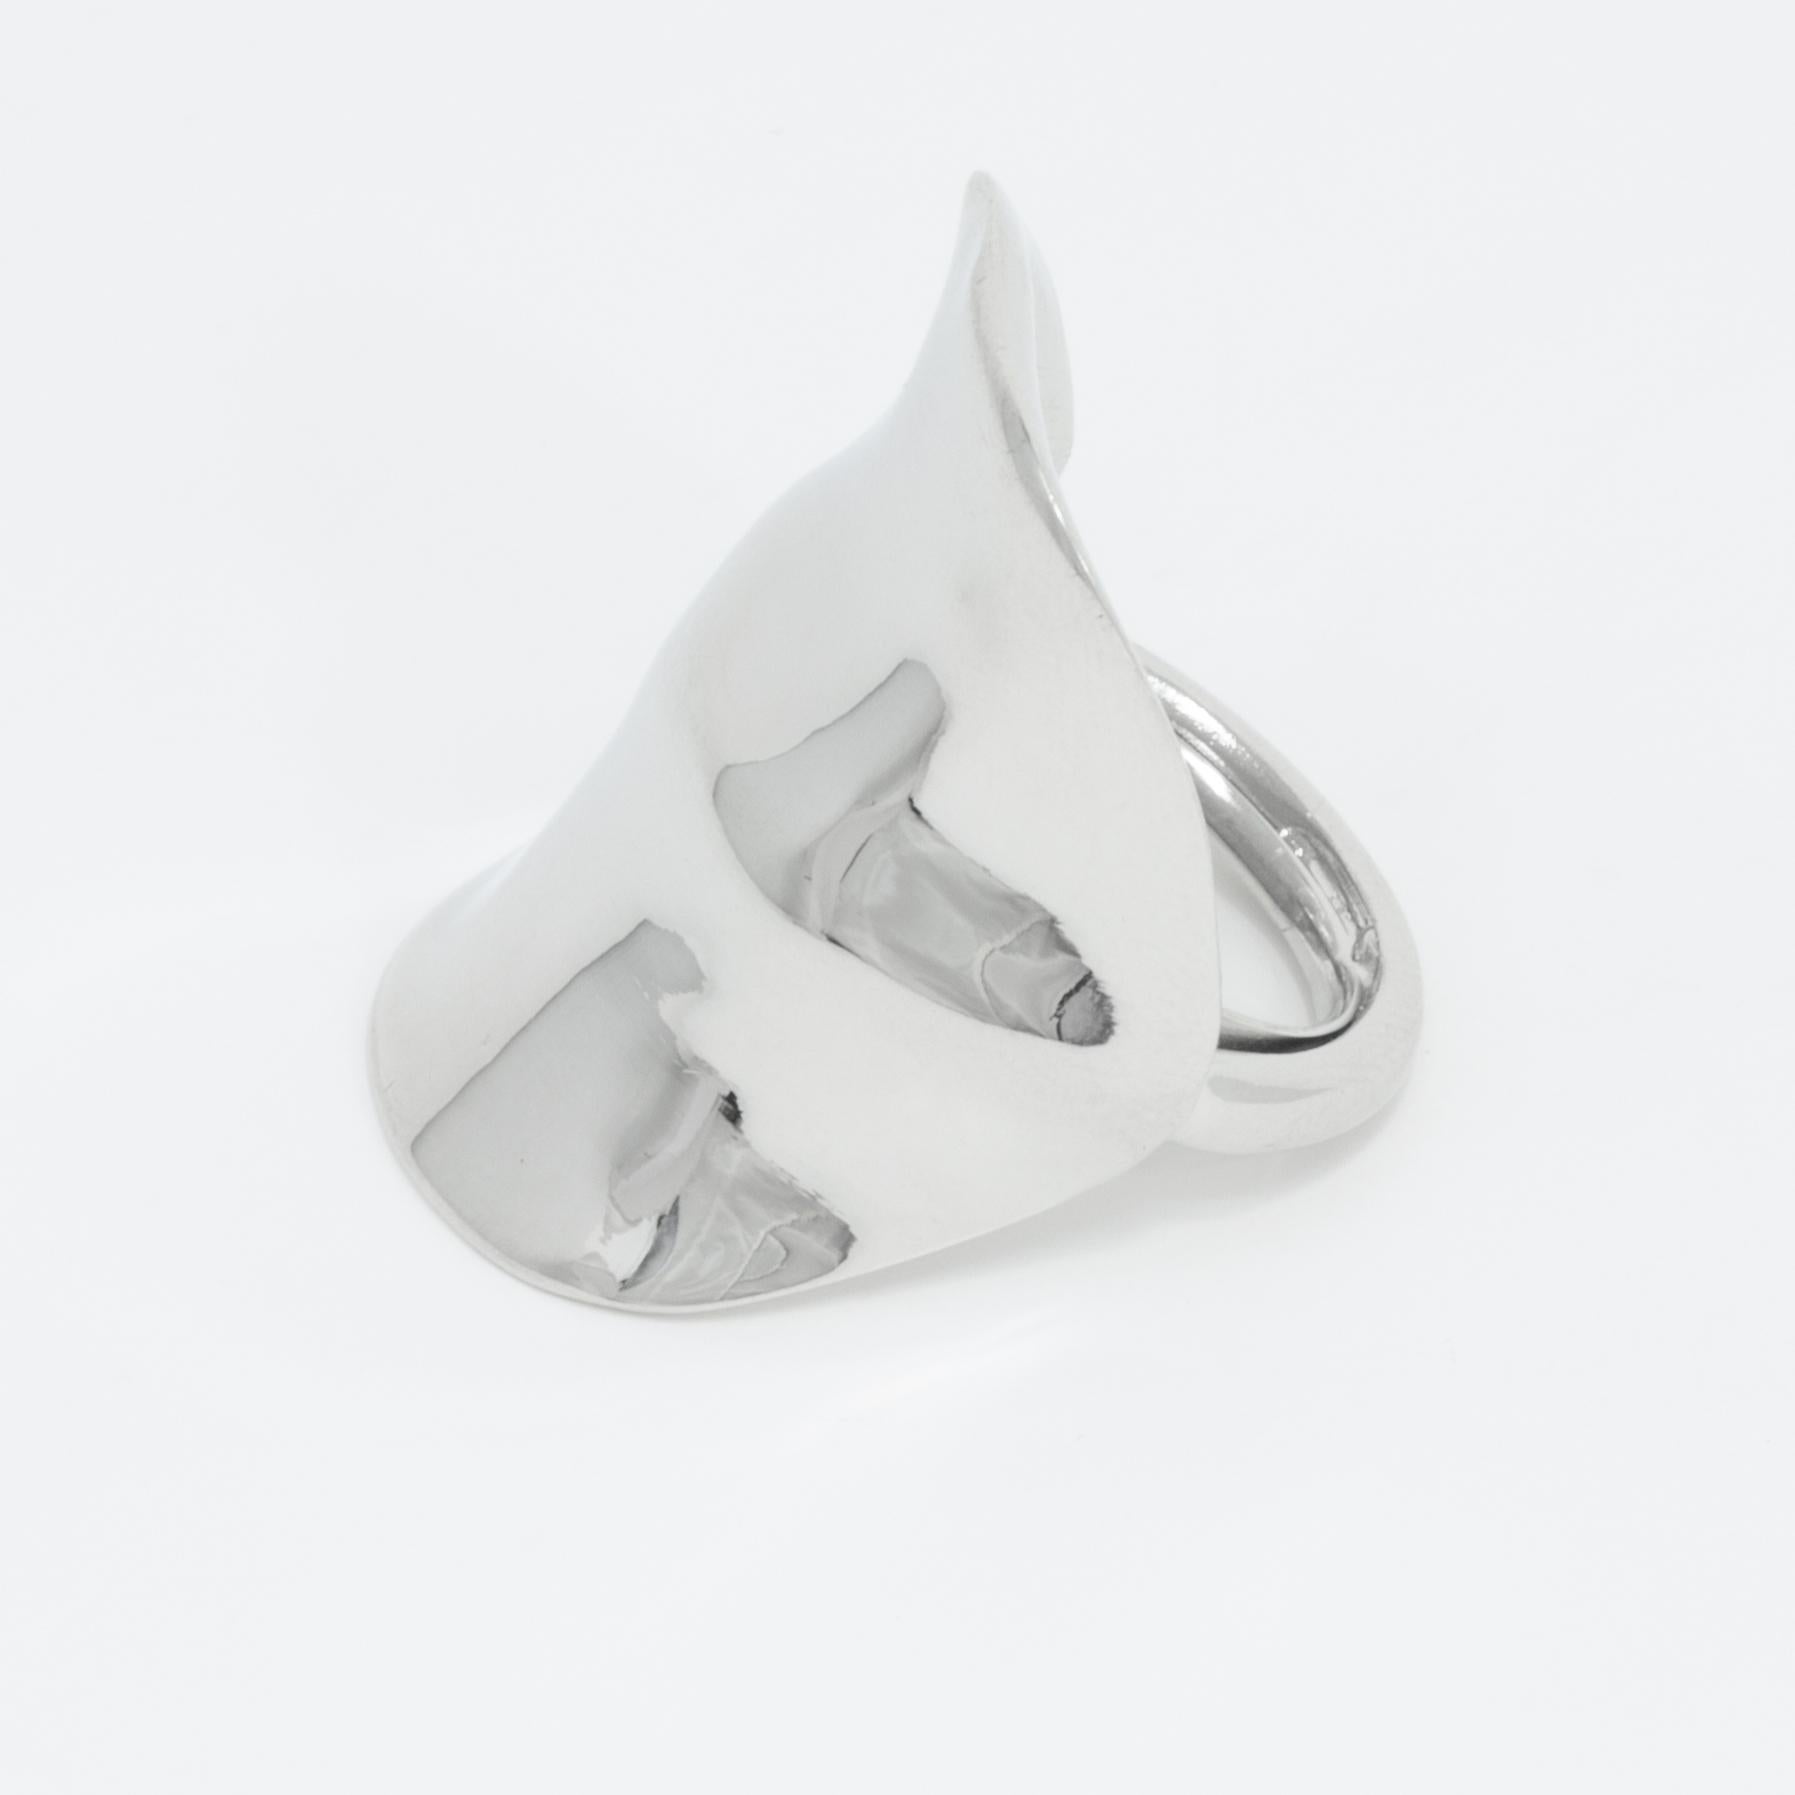 A flashy, polished silver, statement ring. Add a perfect touch of silver glow with this ring from Kenneth Jay Lane!

Silvertone.

Adjustable sizes 5 to 8.5 

Tags, Marks, Hallmarks: Kenneth Lane